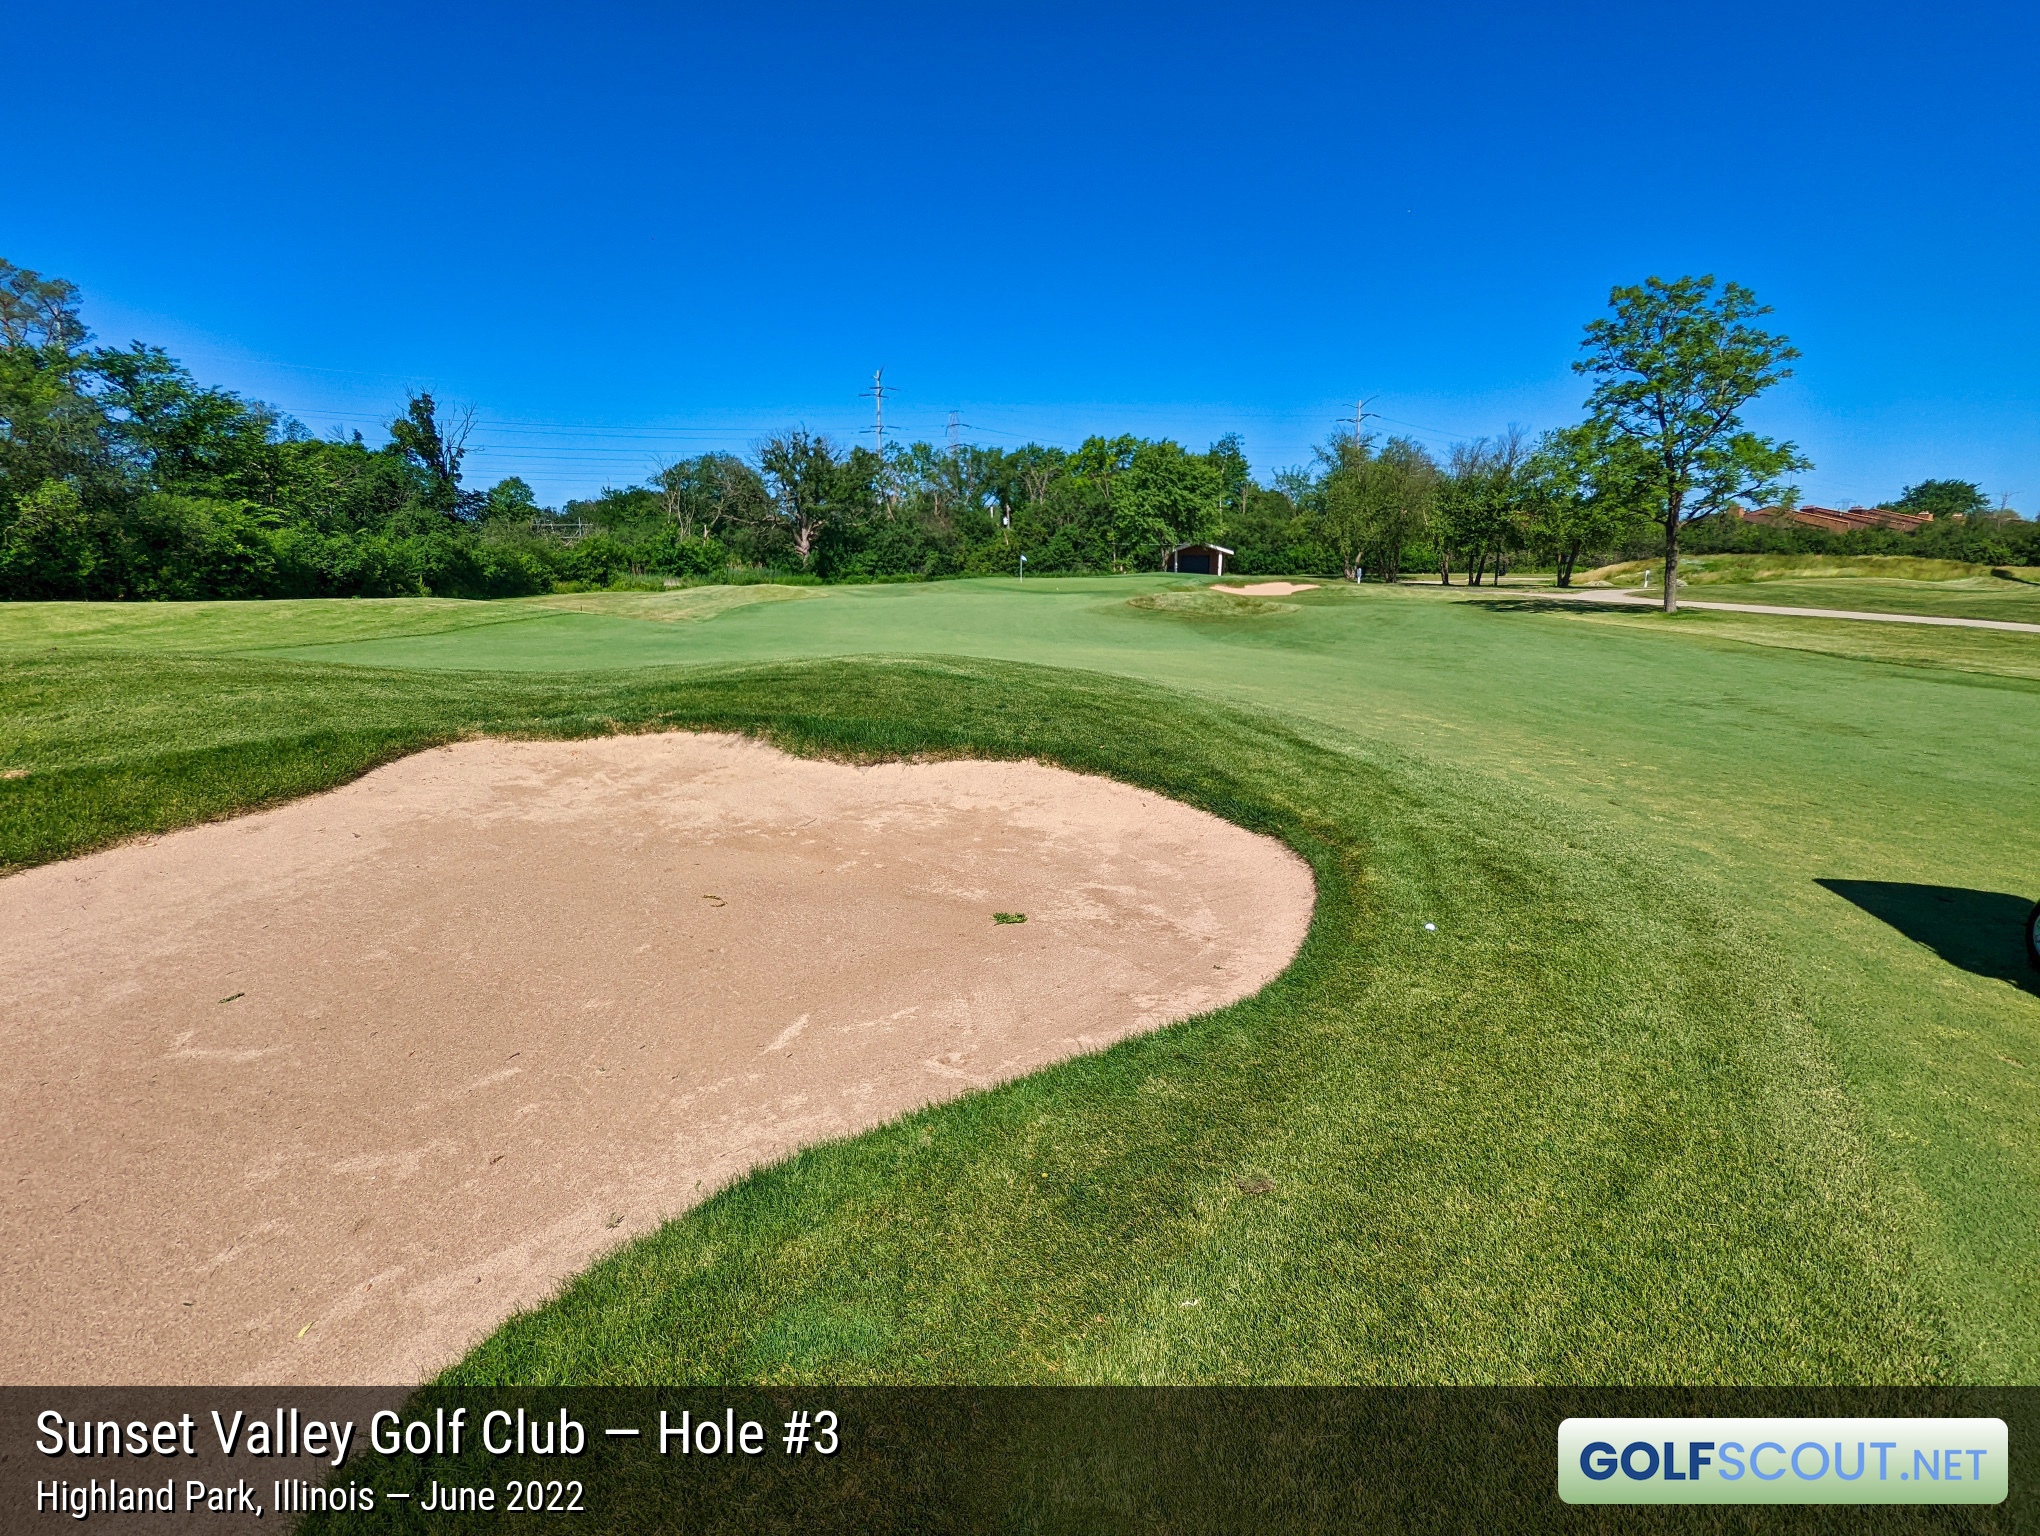 Photo of hole #3 at Sunset Valley Golf Club in Highland Park, Illinois. 